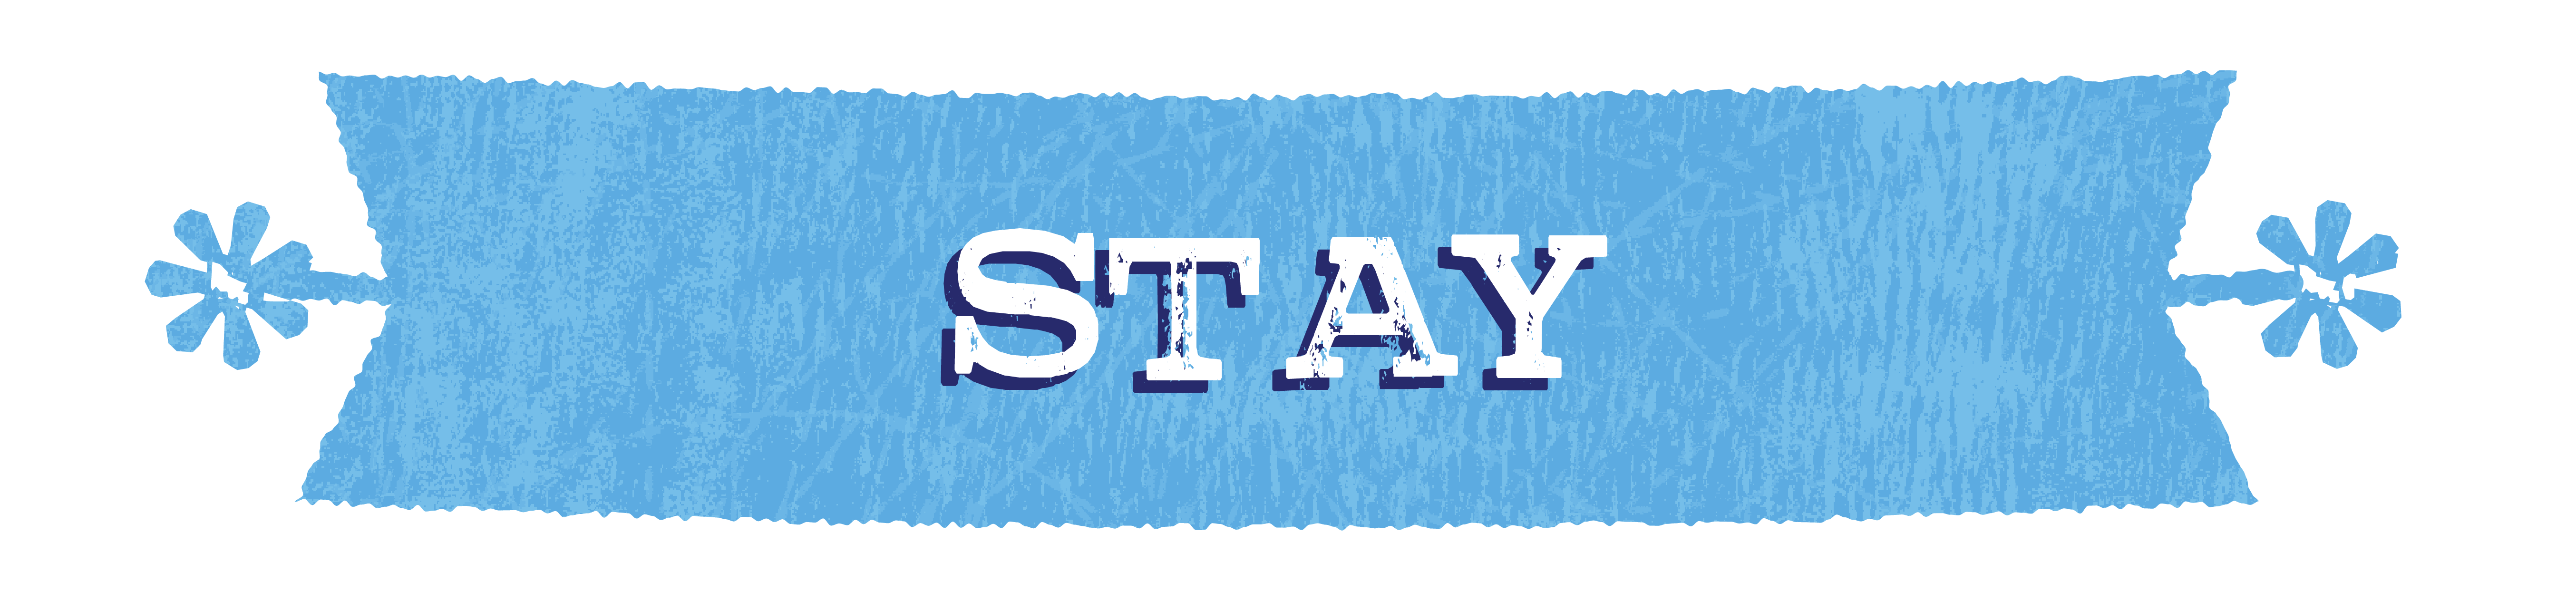 Blue banner that says "Stay"